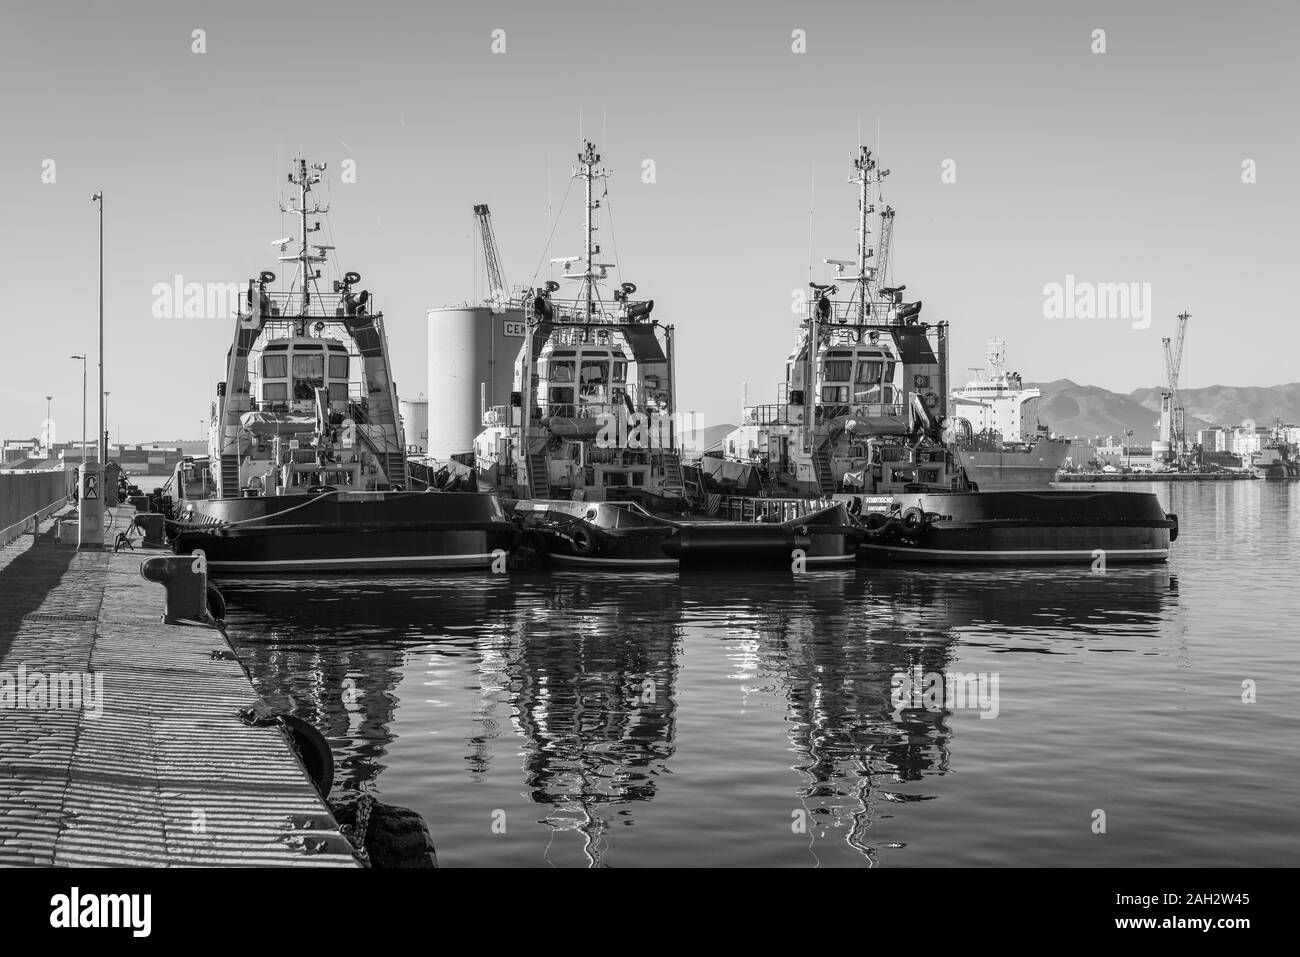 Malaga, Spain - December 4, 2018: Sea tugboats moored in the port of Malaga, Andalusia, Spain. Black and white photography. Stock Photo